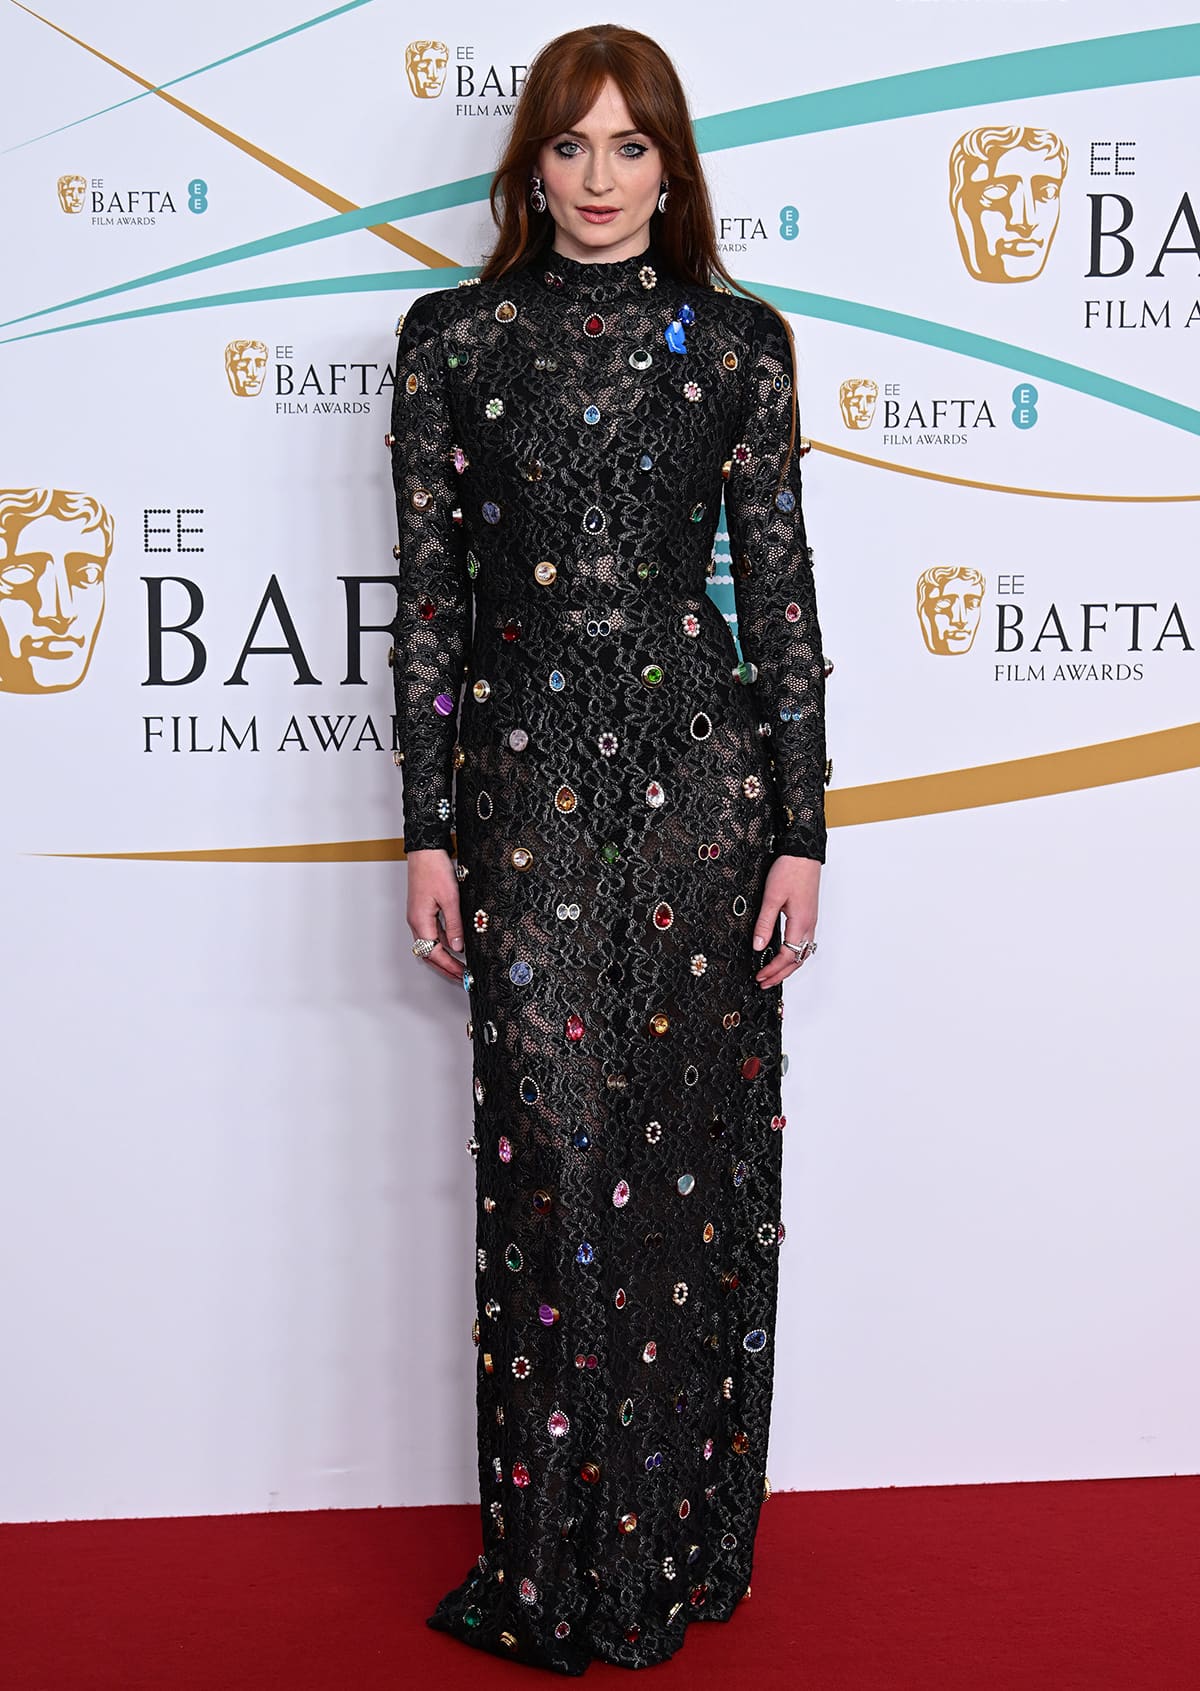 Sophie Turner, pictured at the British Academy Film Awards 2023, is said to be taking things slow and keeping her options open following her PDA with Peregrine Pearson